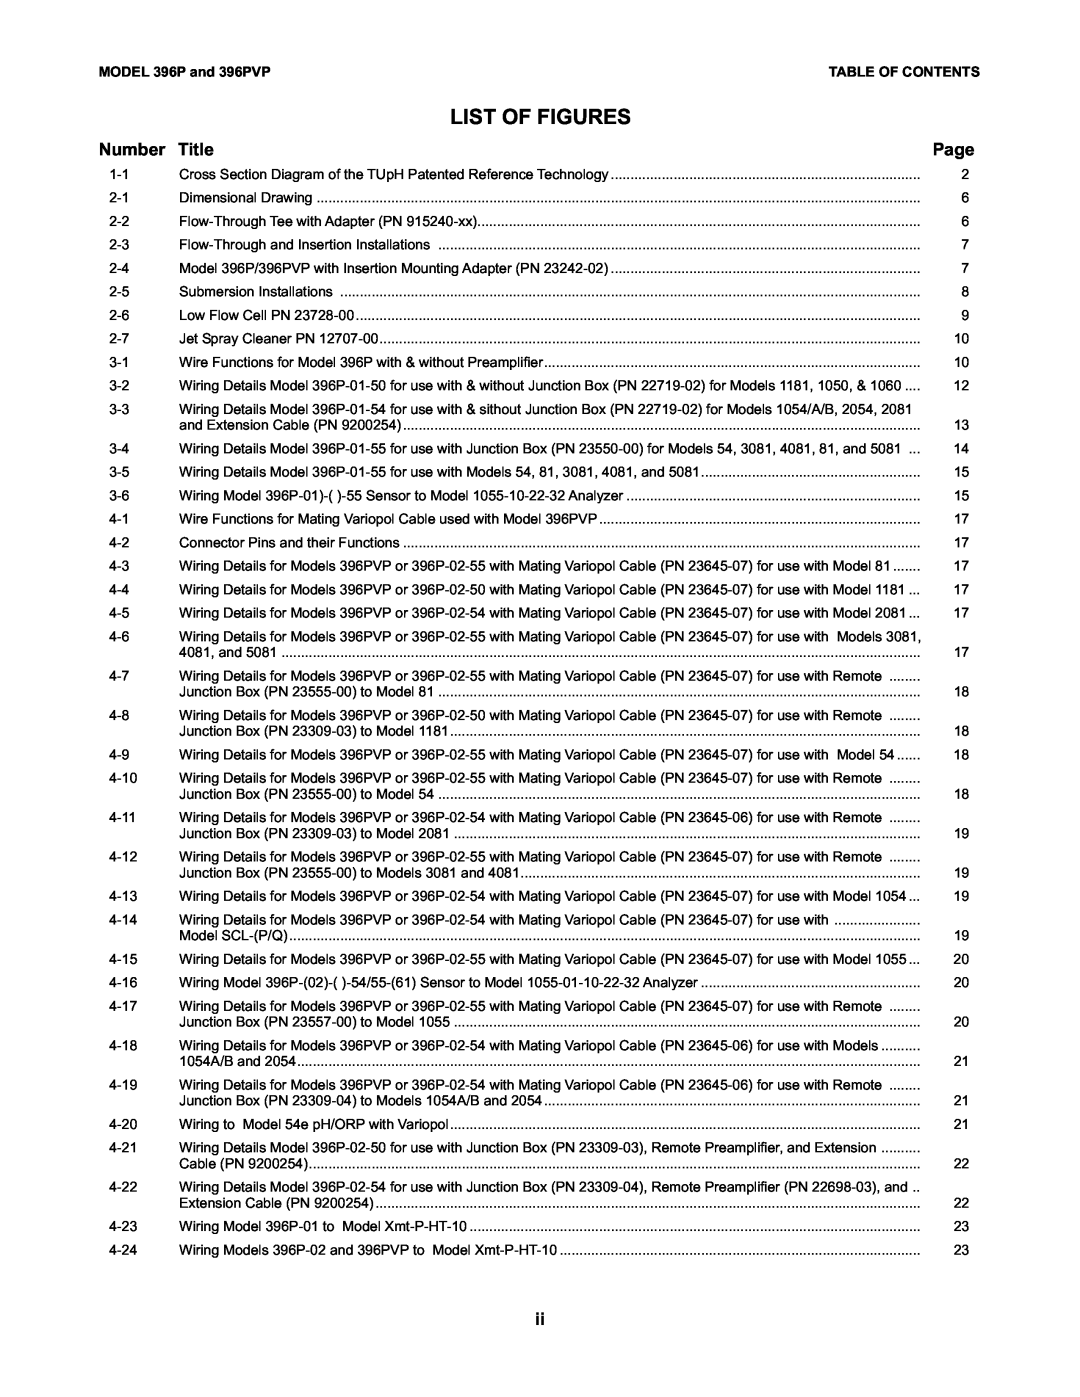 Emerson Process Management instruction manual List Of Figures, Number, Title, MODEL 396P and 396PVPTABLE OF CONTENTS 